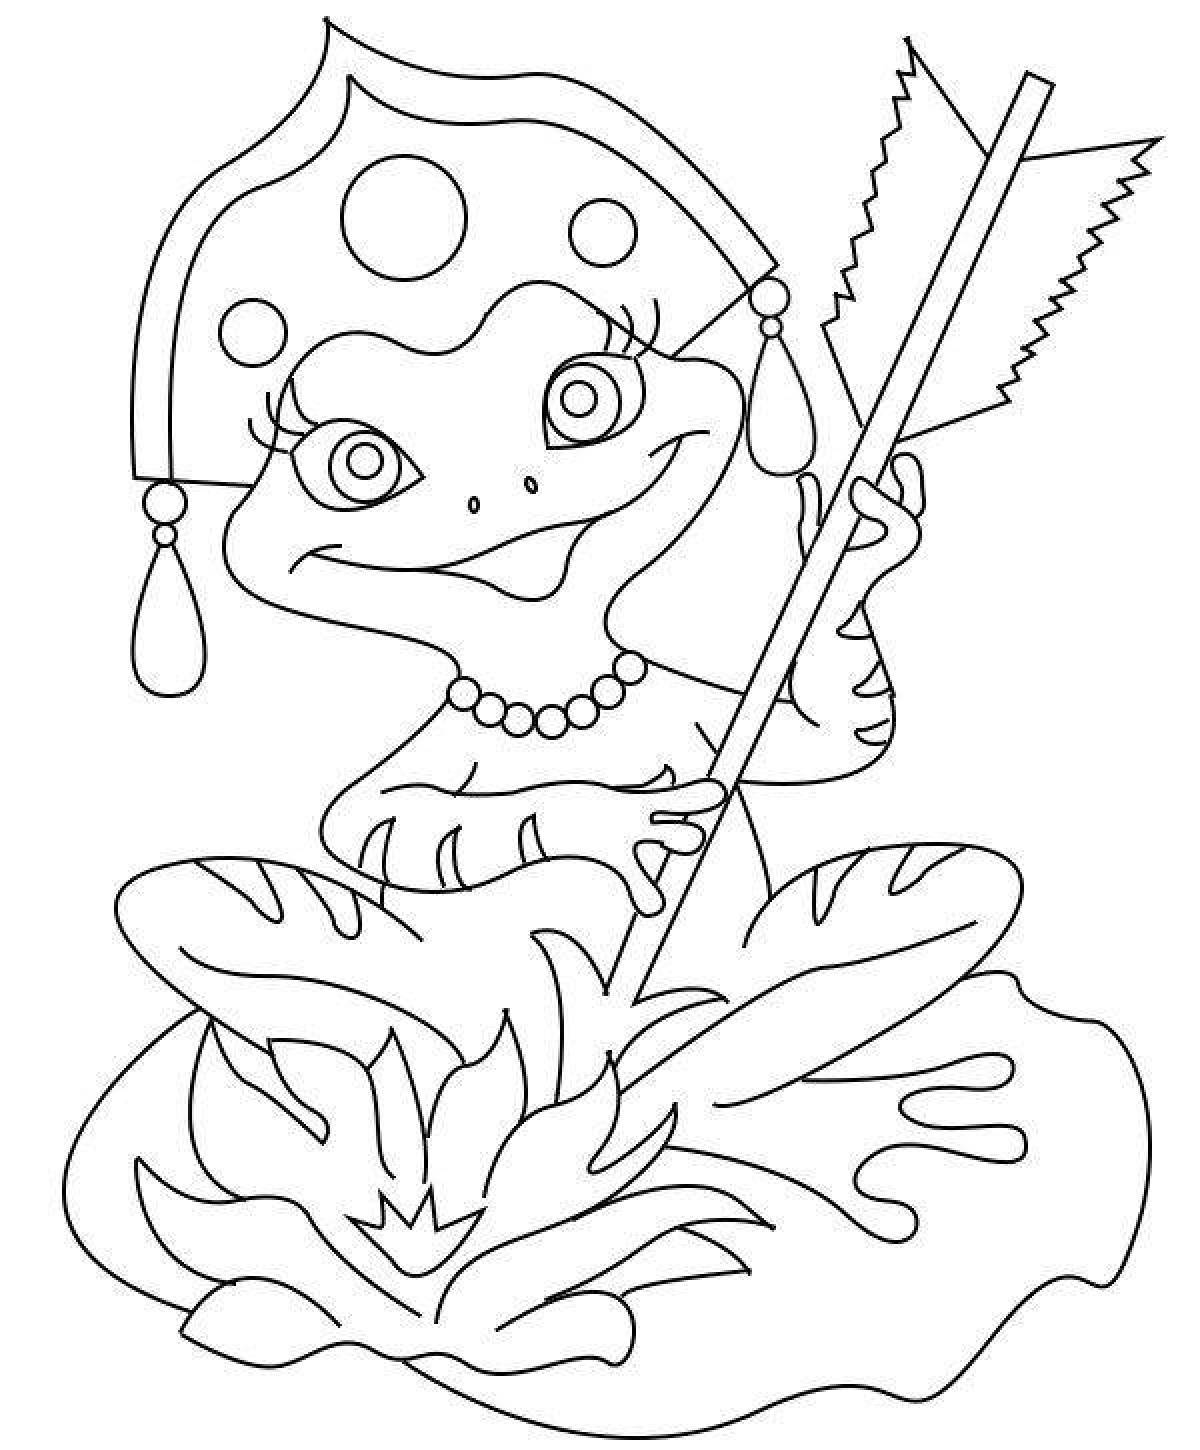 Courageous frog princess coloring book for kids